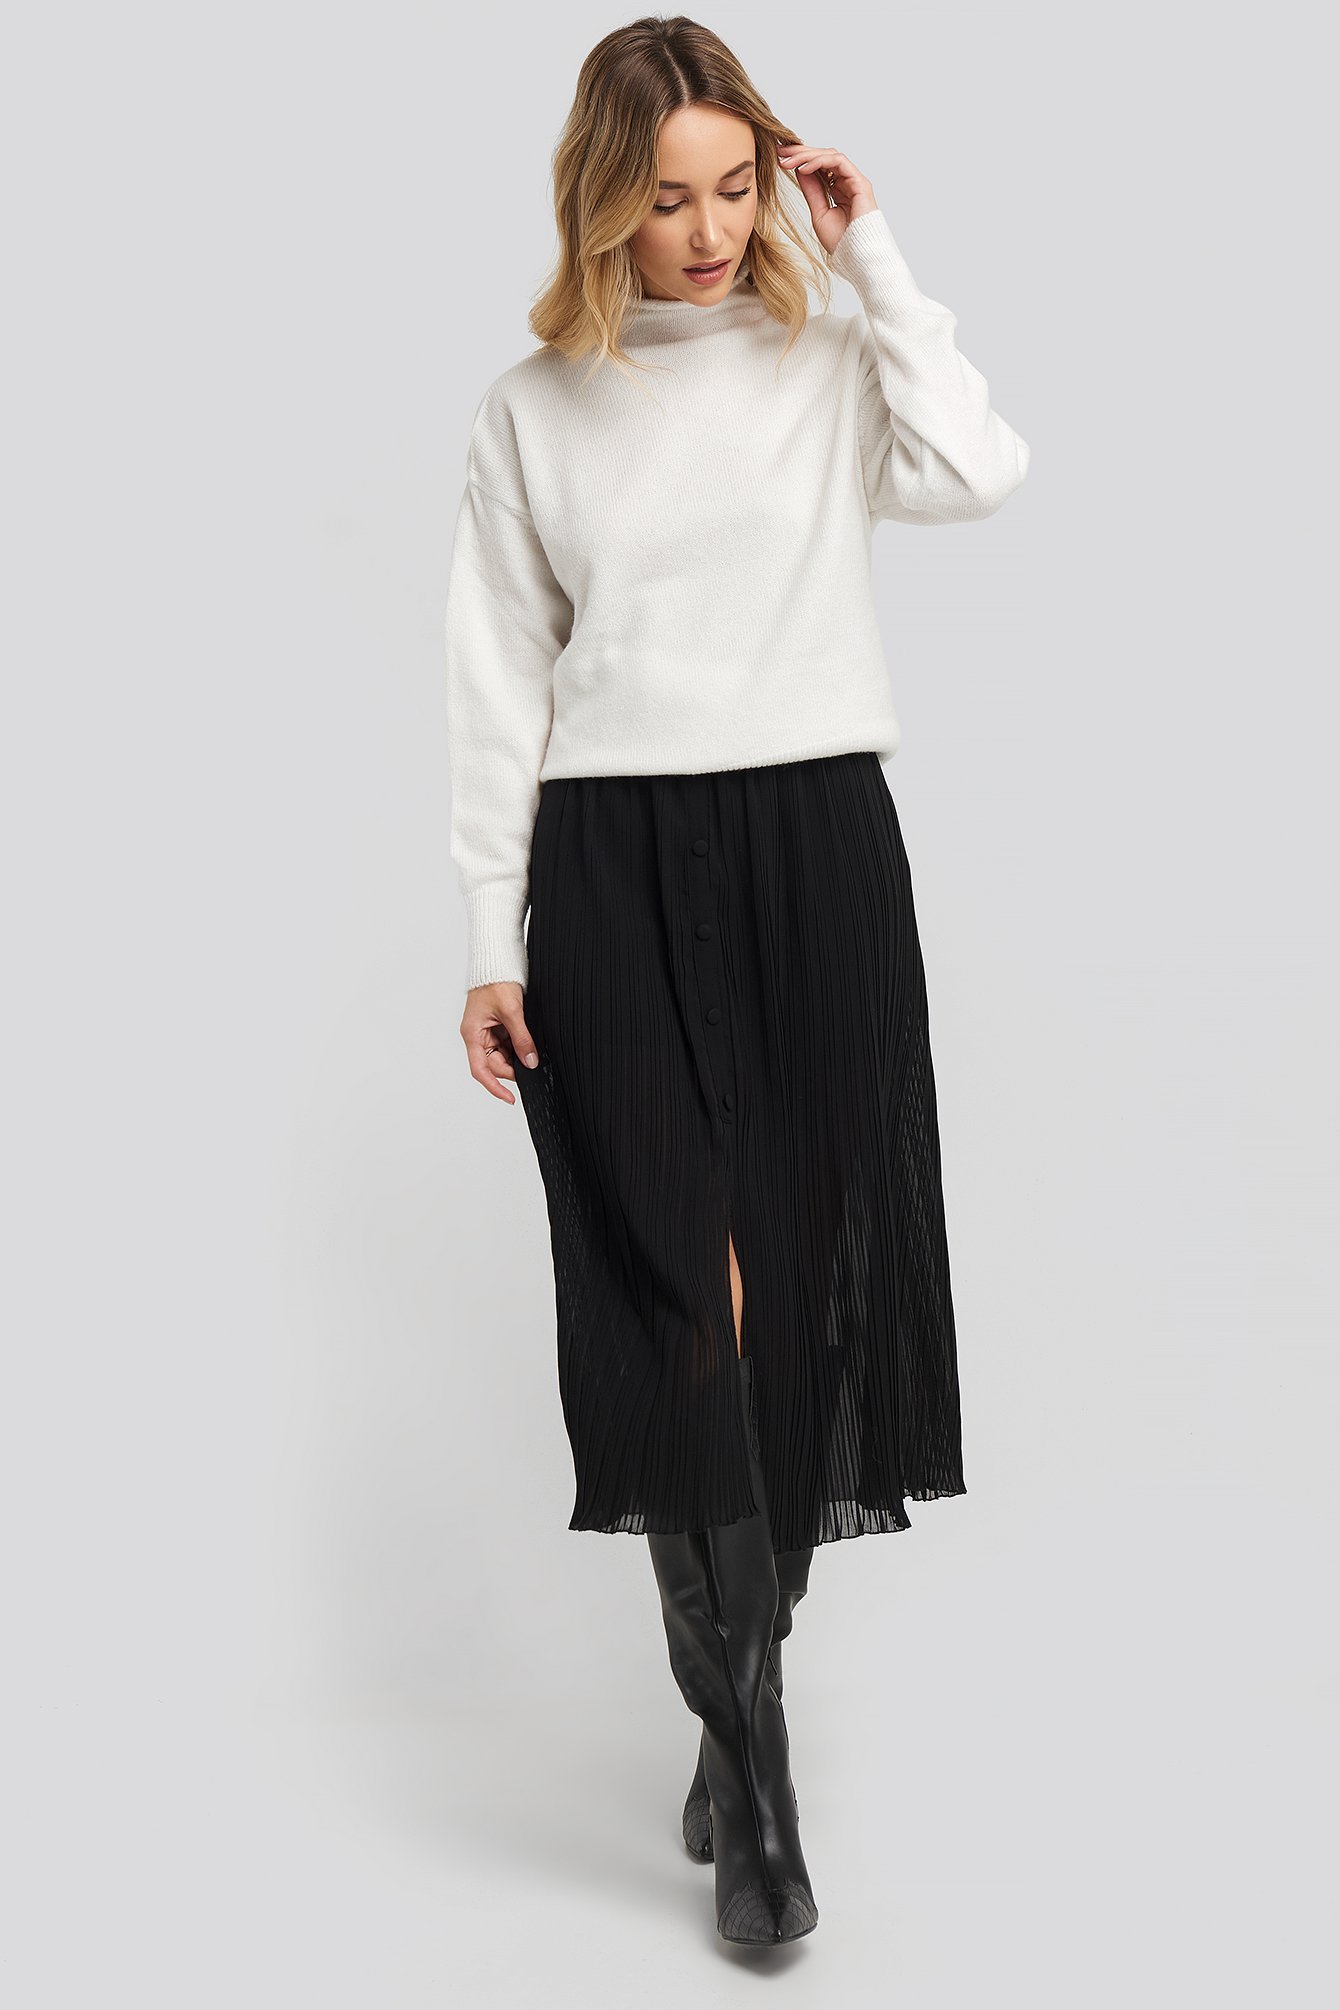 Button Detail Pleated Skirt Outfit.